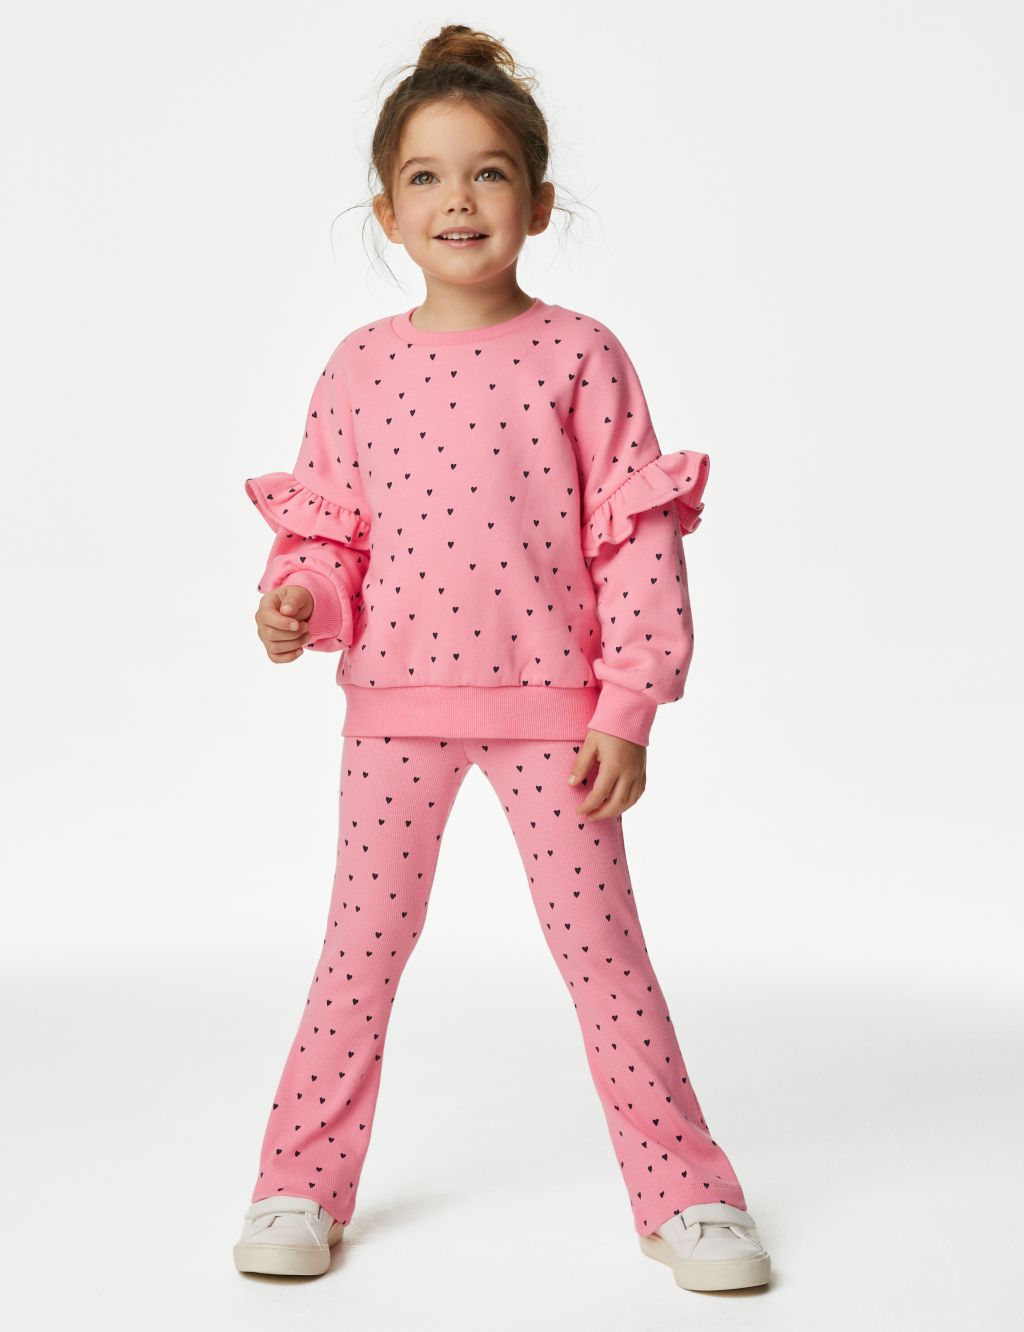 2pc Cotton Rich Heart Top & Bottom Outfit (2-8 Yrs) image 1